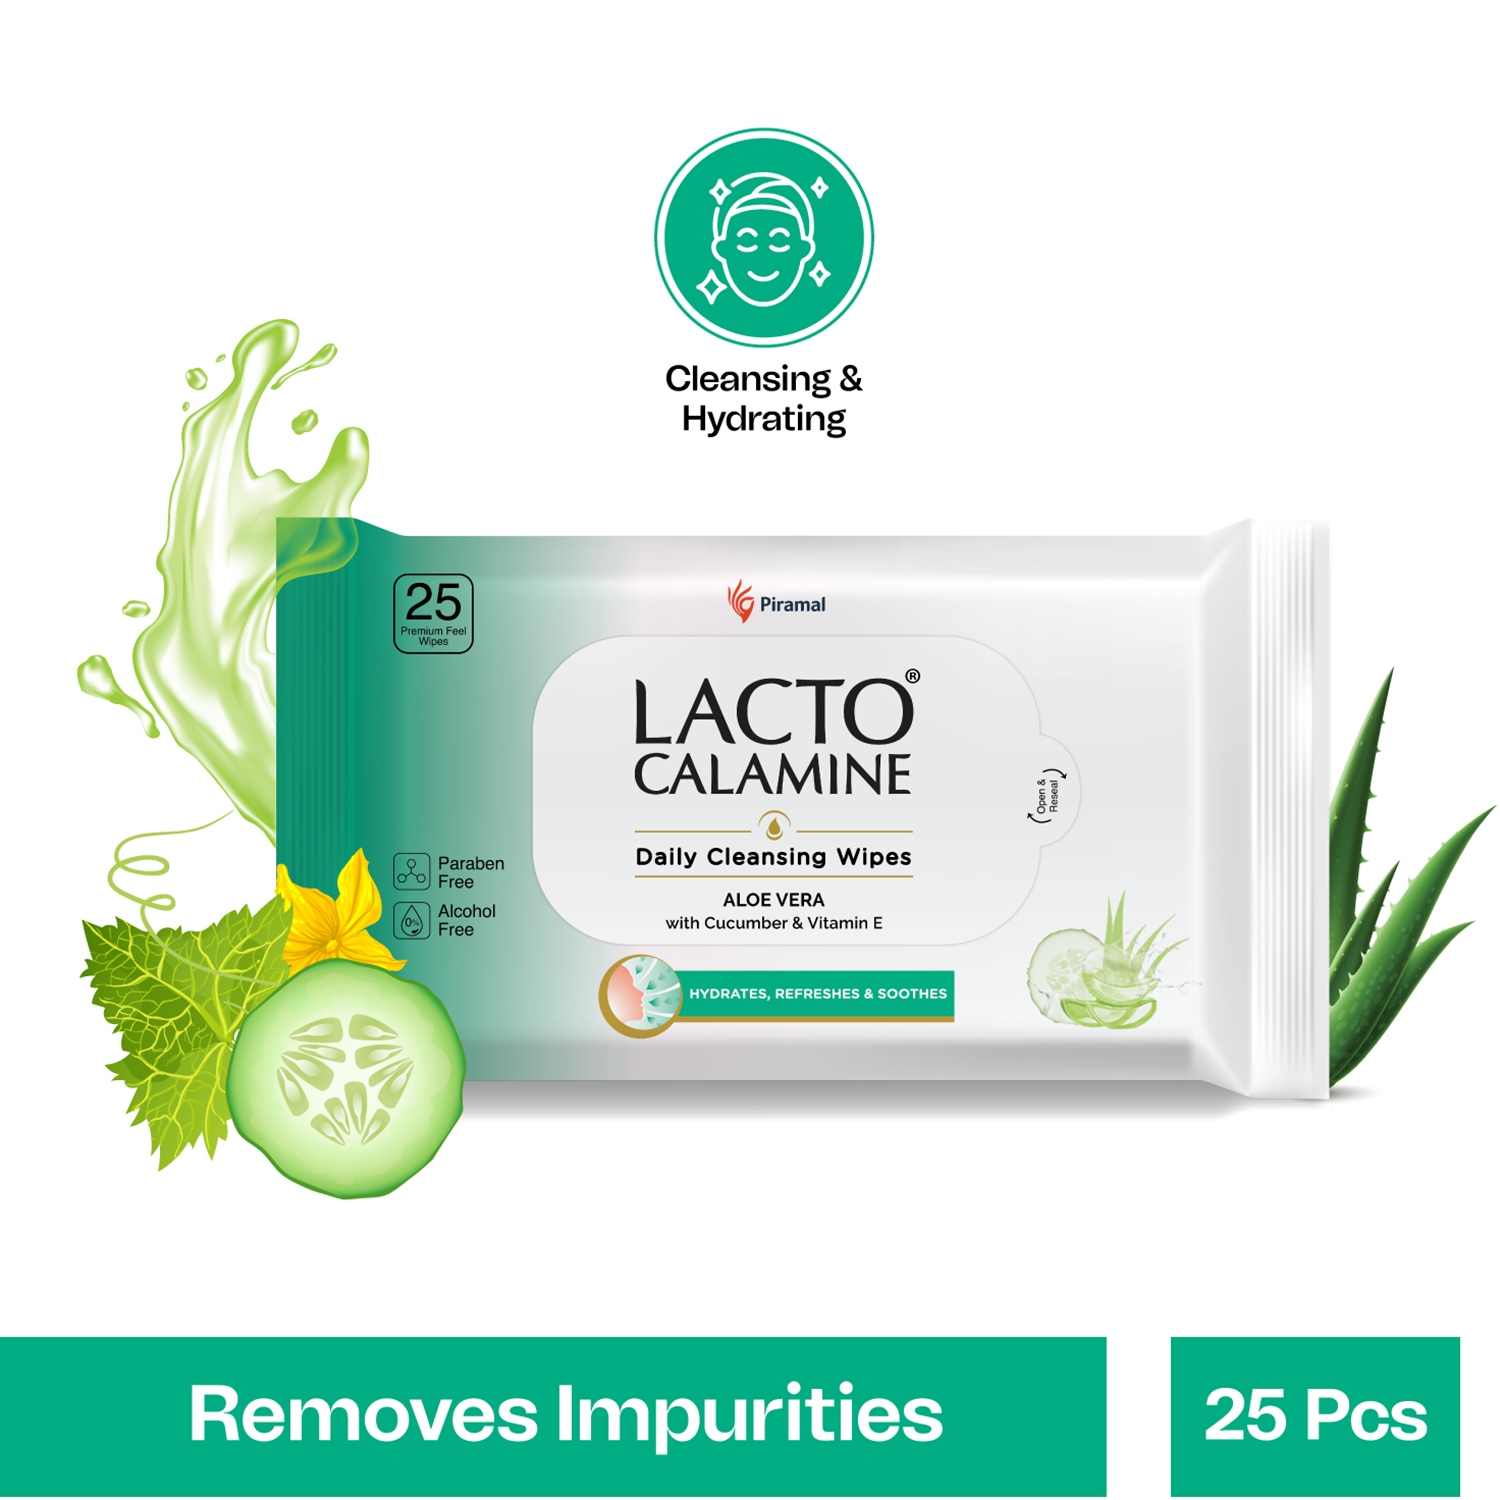 Lacto Calamine | Lacto Calamine Daily Cleansing Face-Makeup Wet Wipes With Aloe Vera, Cucumber & Vitamin E-PO1 (25Pcs)